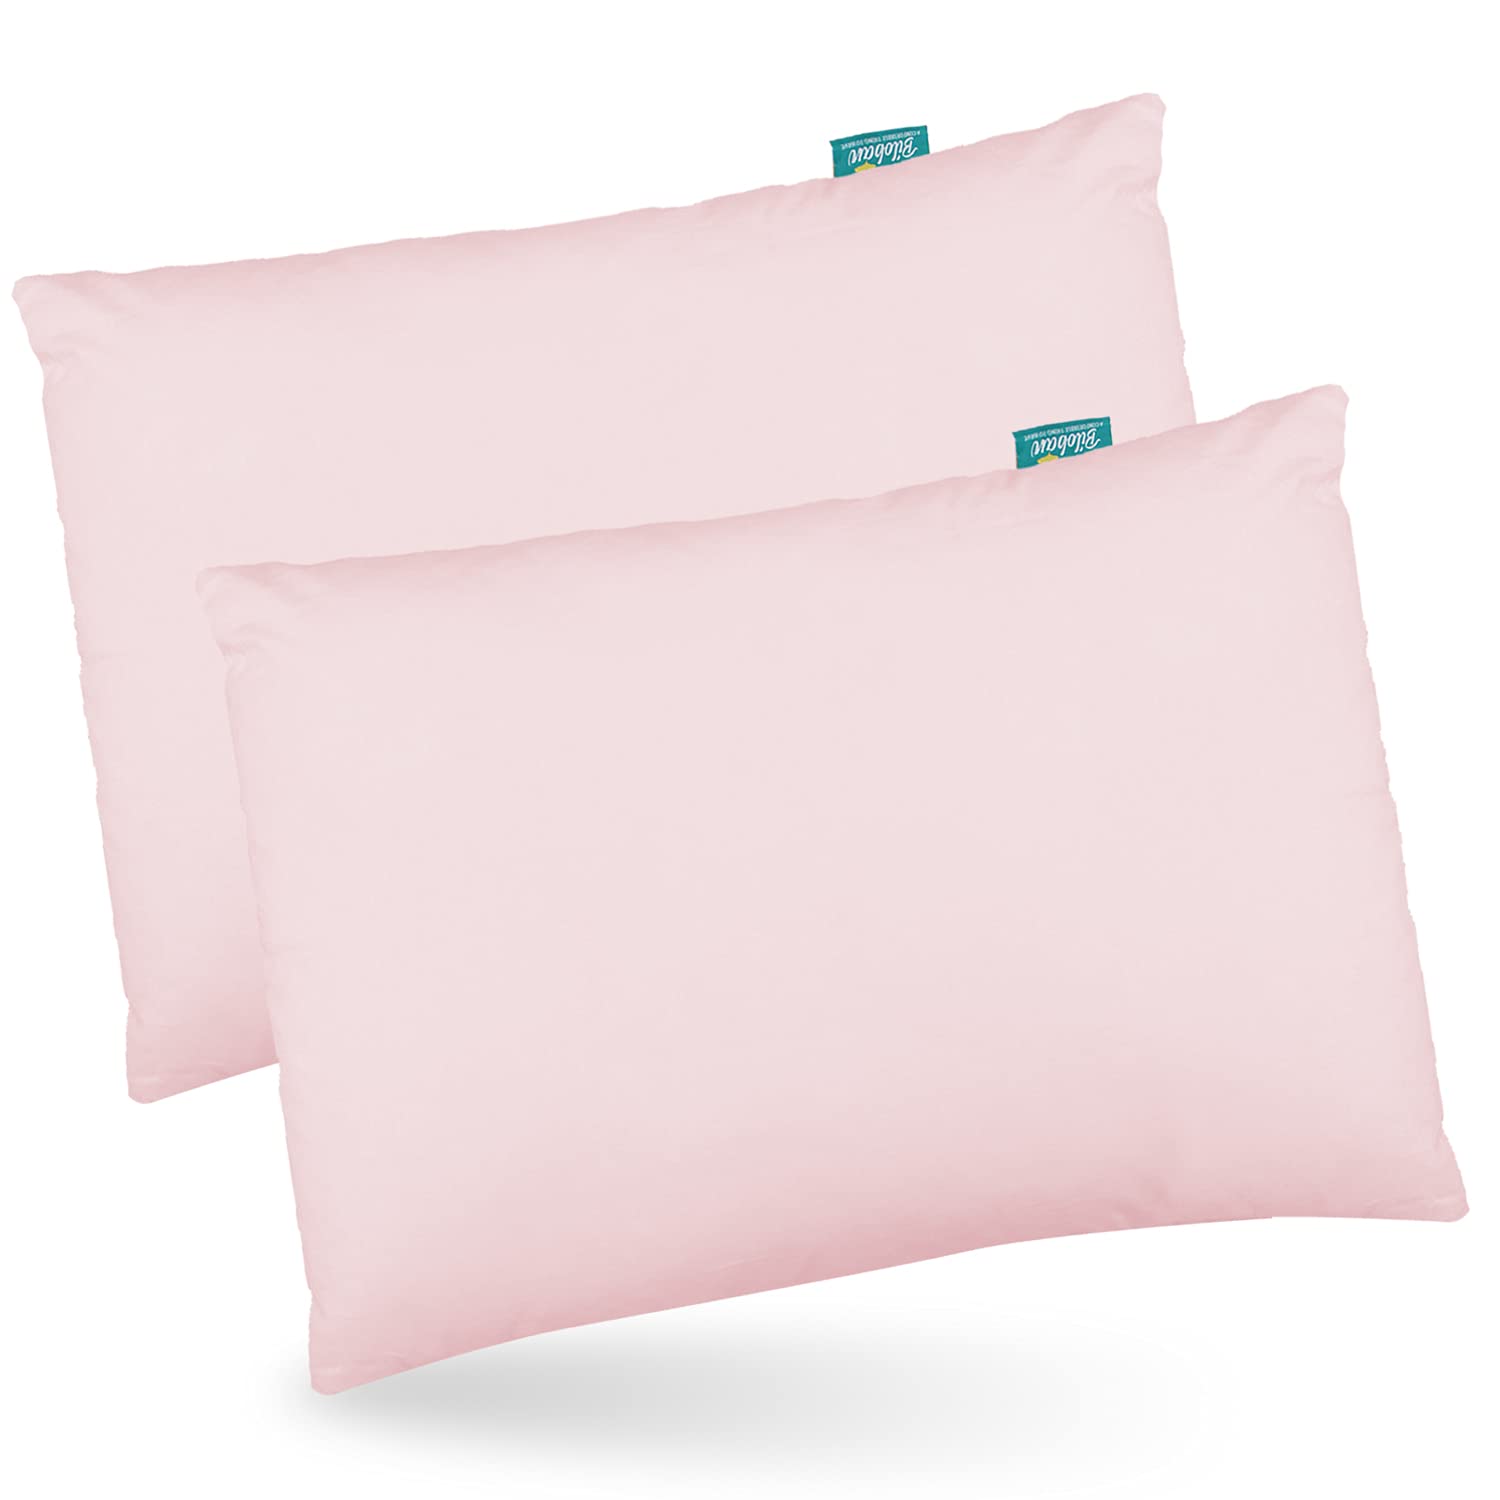 Toddler Pillow Quilted with Pillowcase - 2 Pack, 13" x 18", 100% Cotton, Ultra Soft & Breathable, Pink - Biloban Online Store